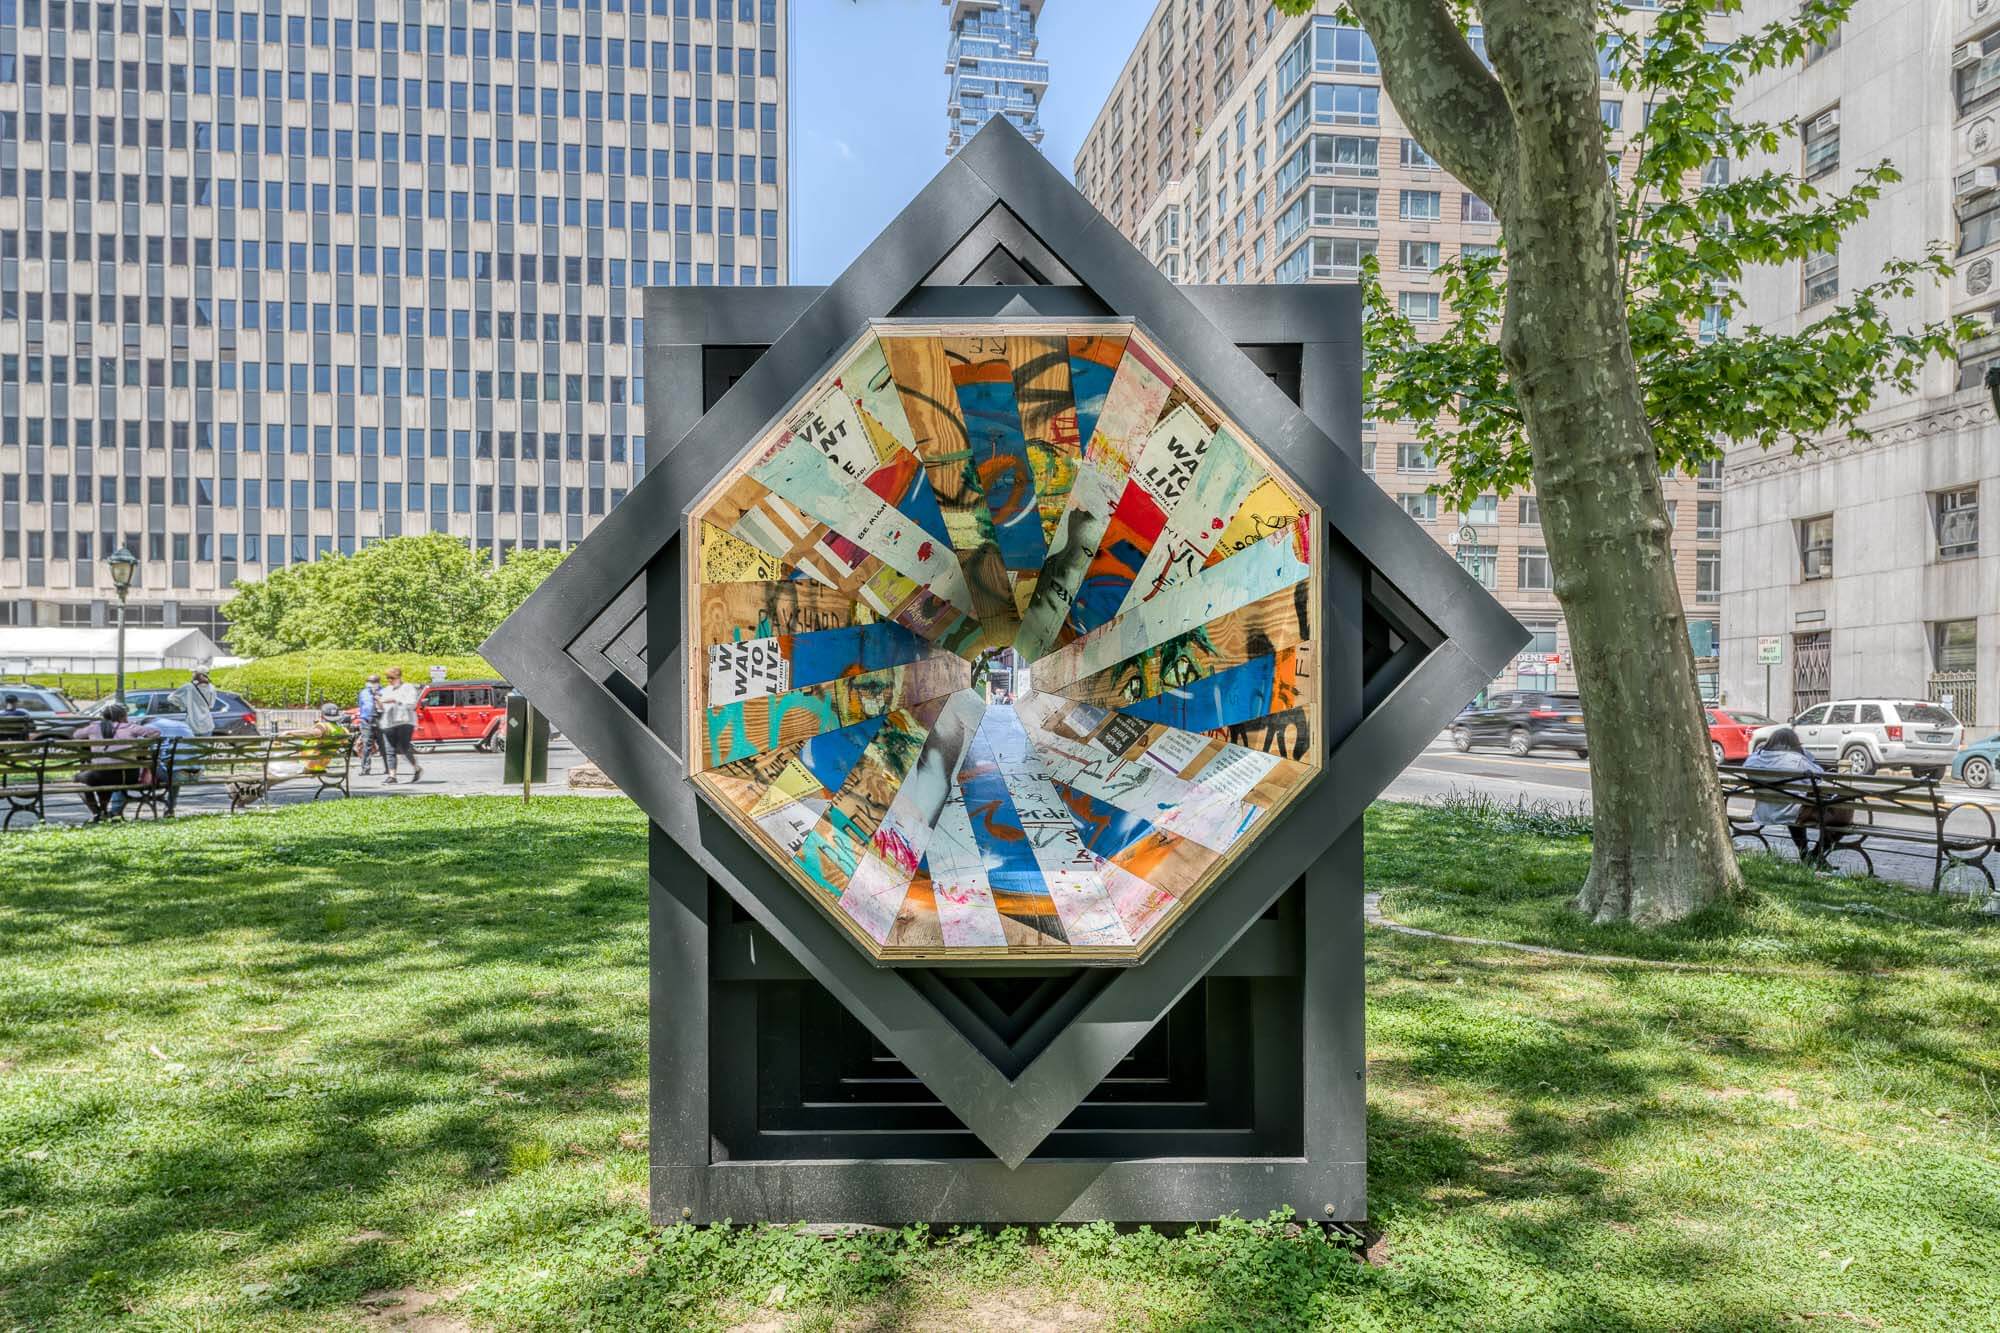 a colorful plywood art installation located in a grassy nyc park